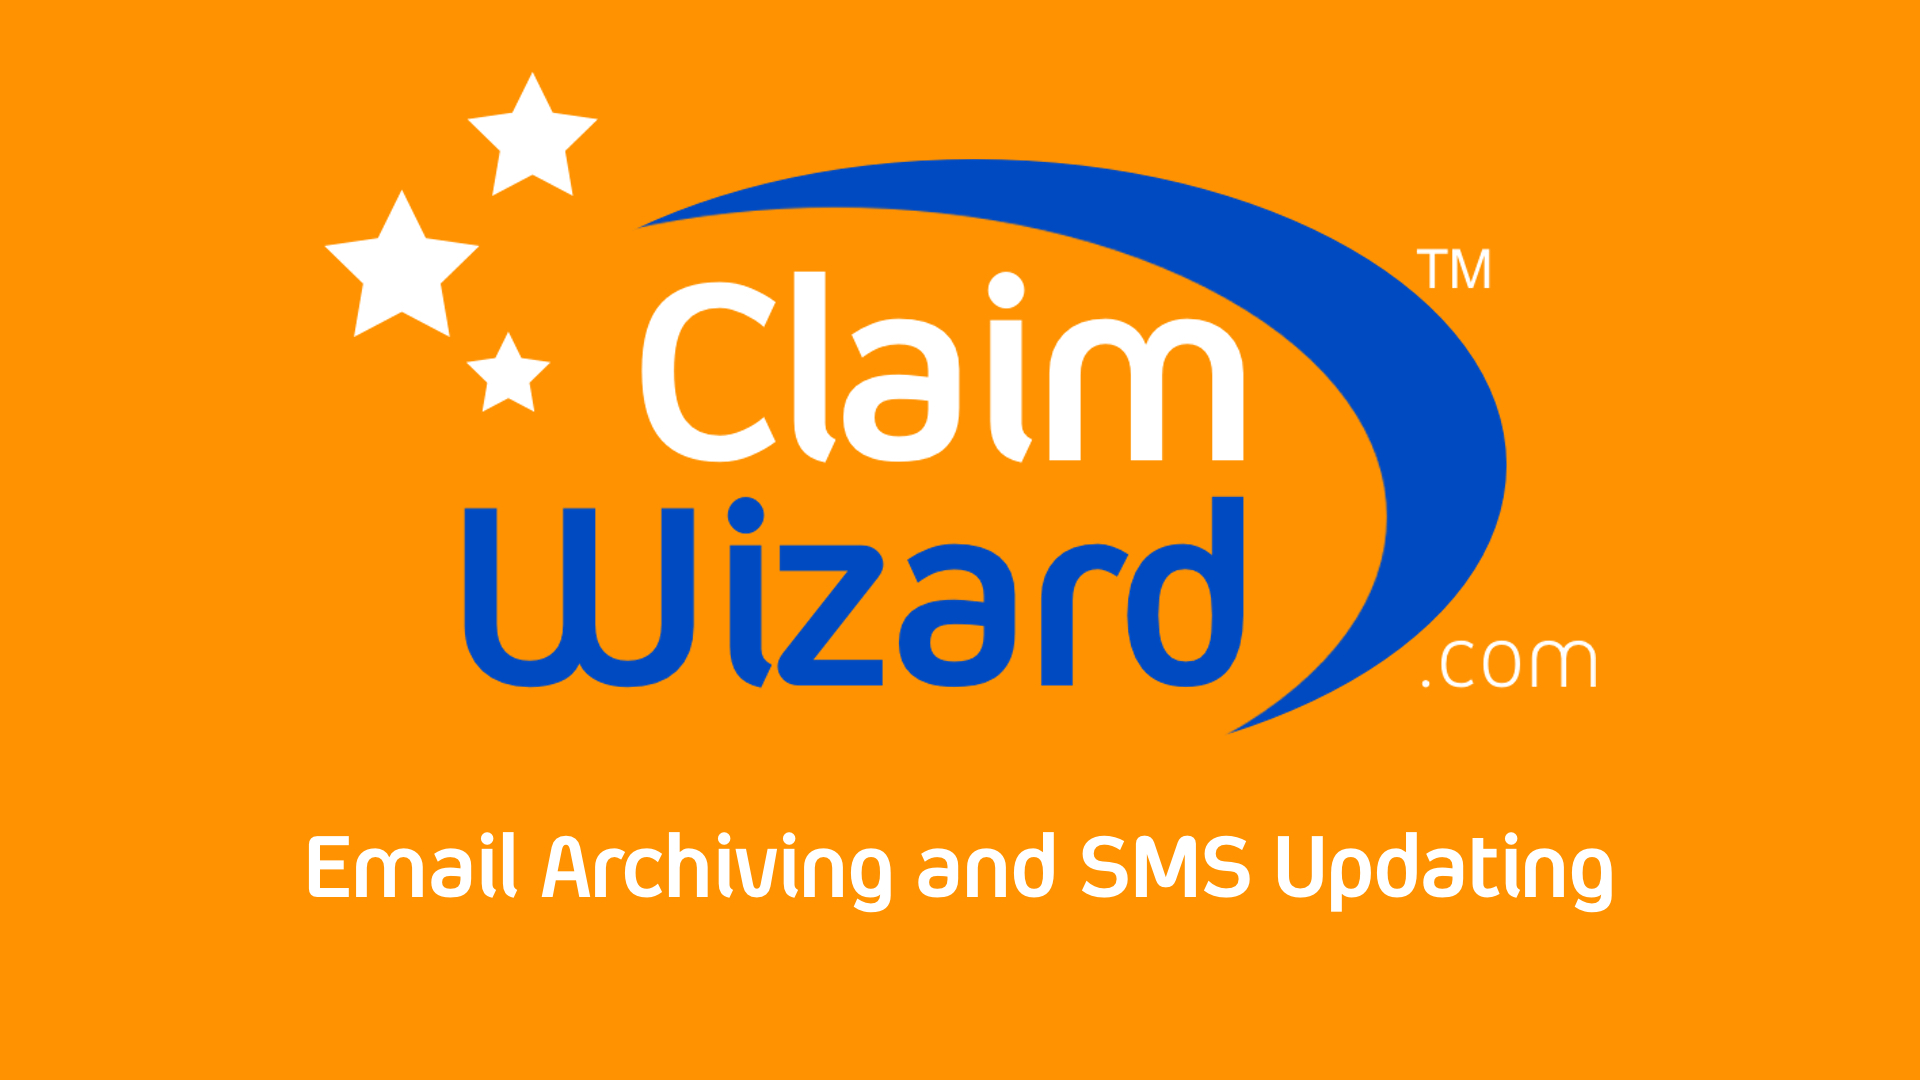 Email Archiving and SMS Updating